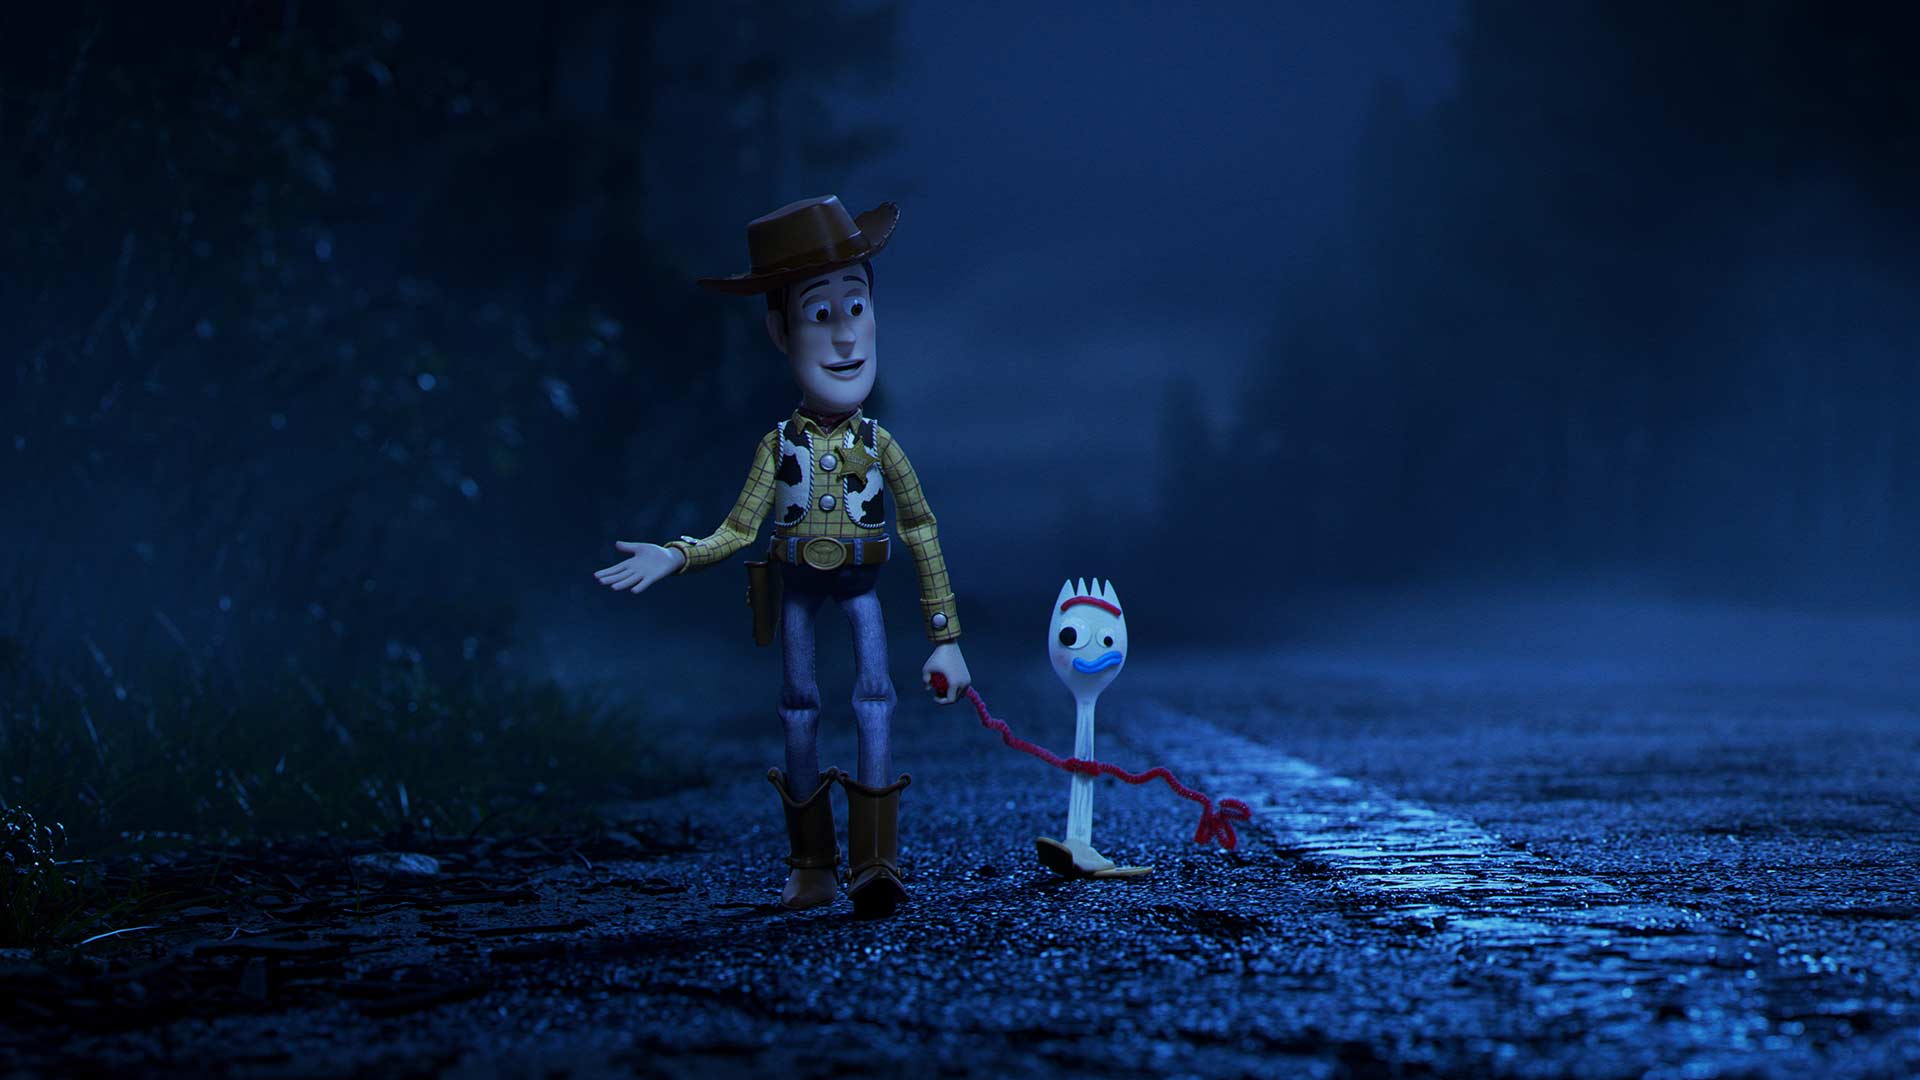 Woody and Fork in the street in the toy story animation 4